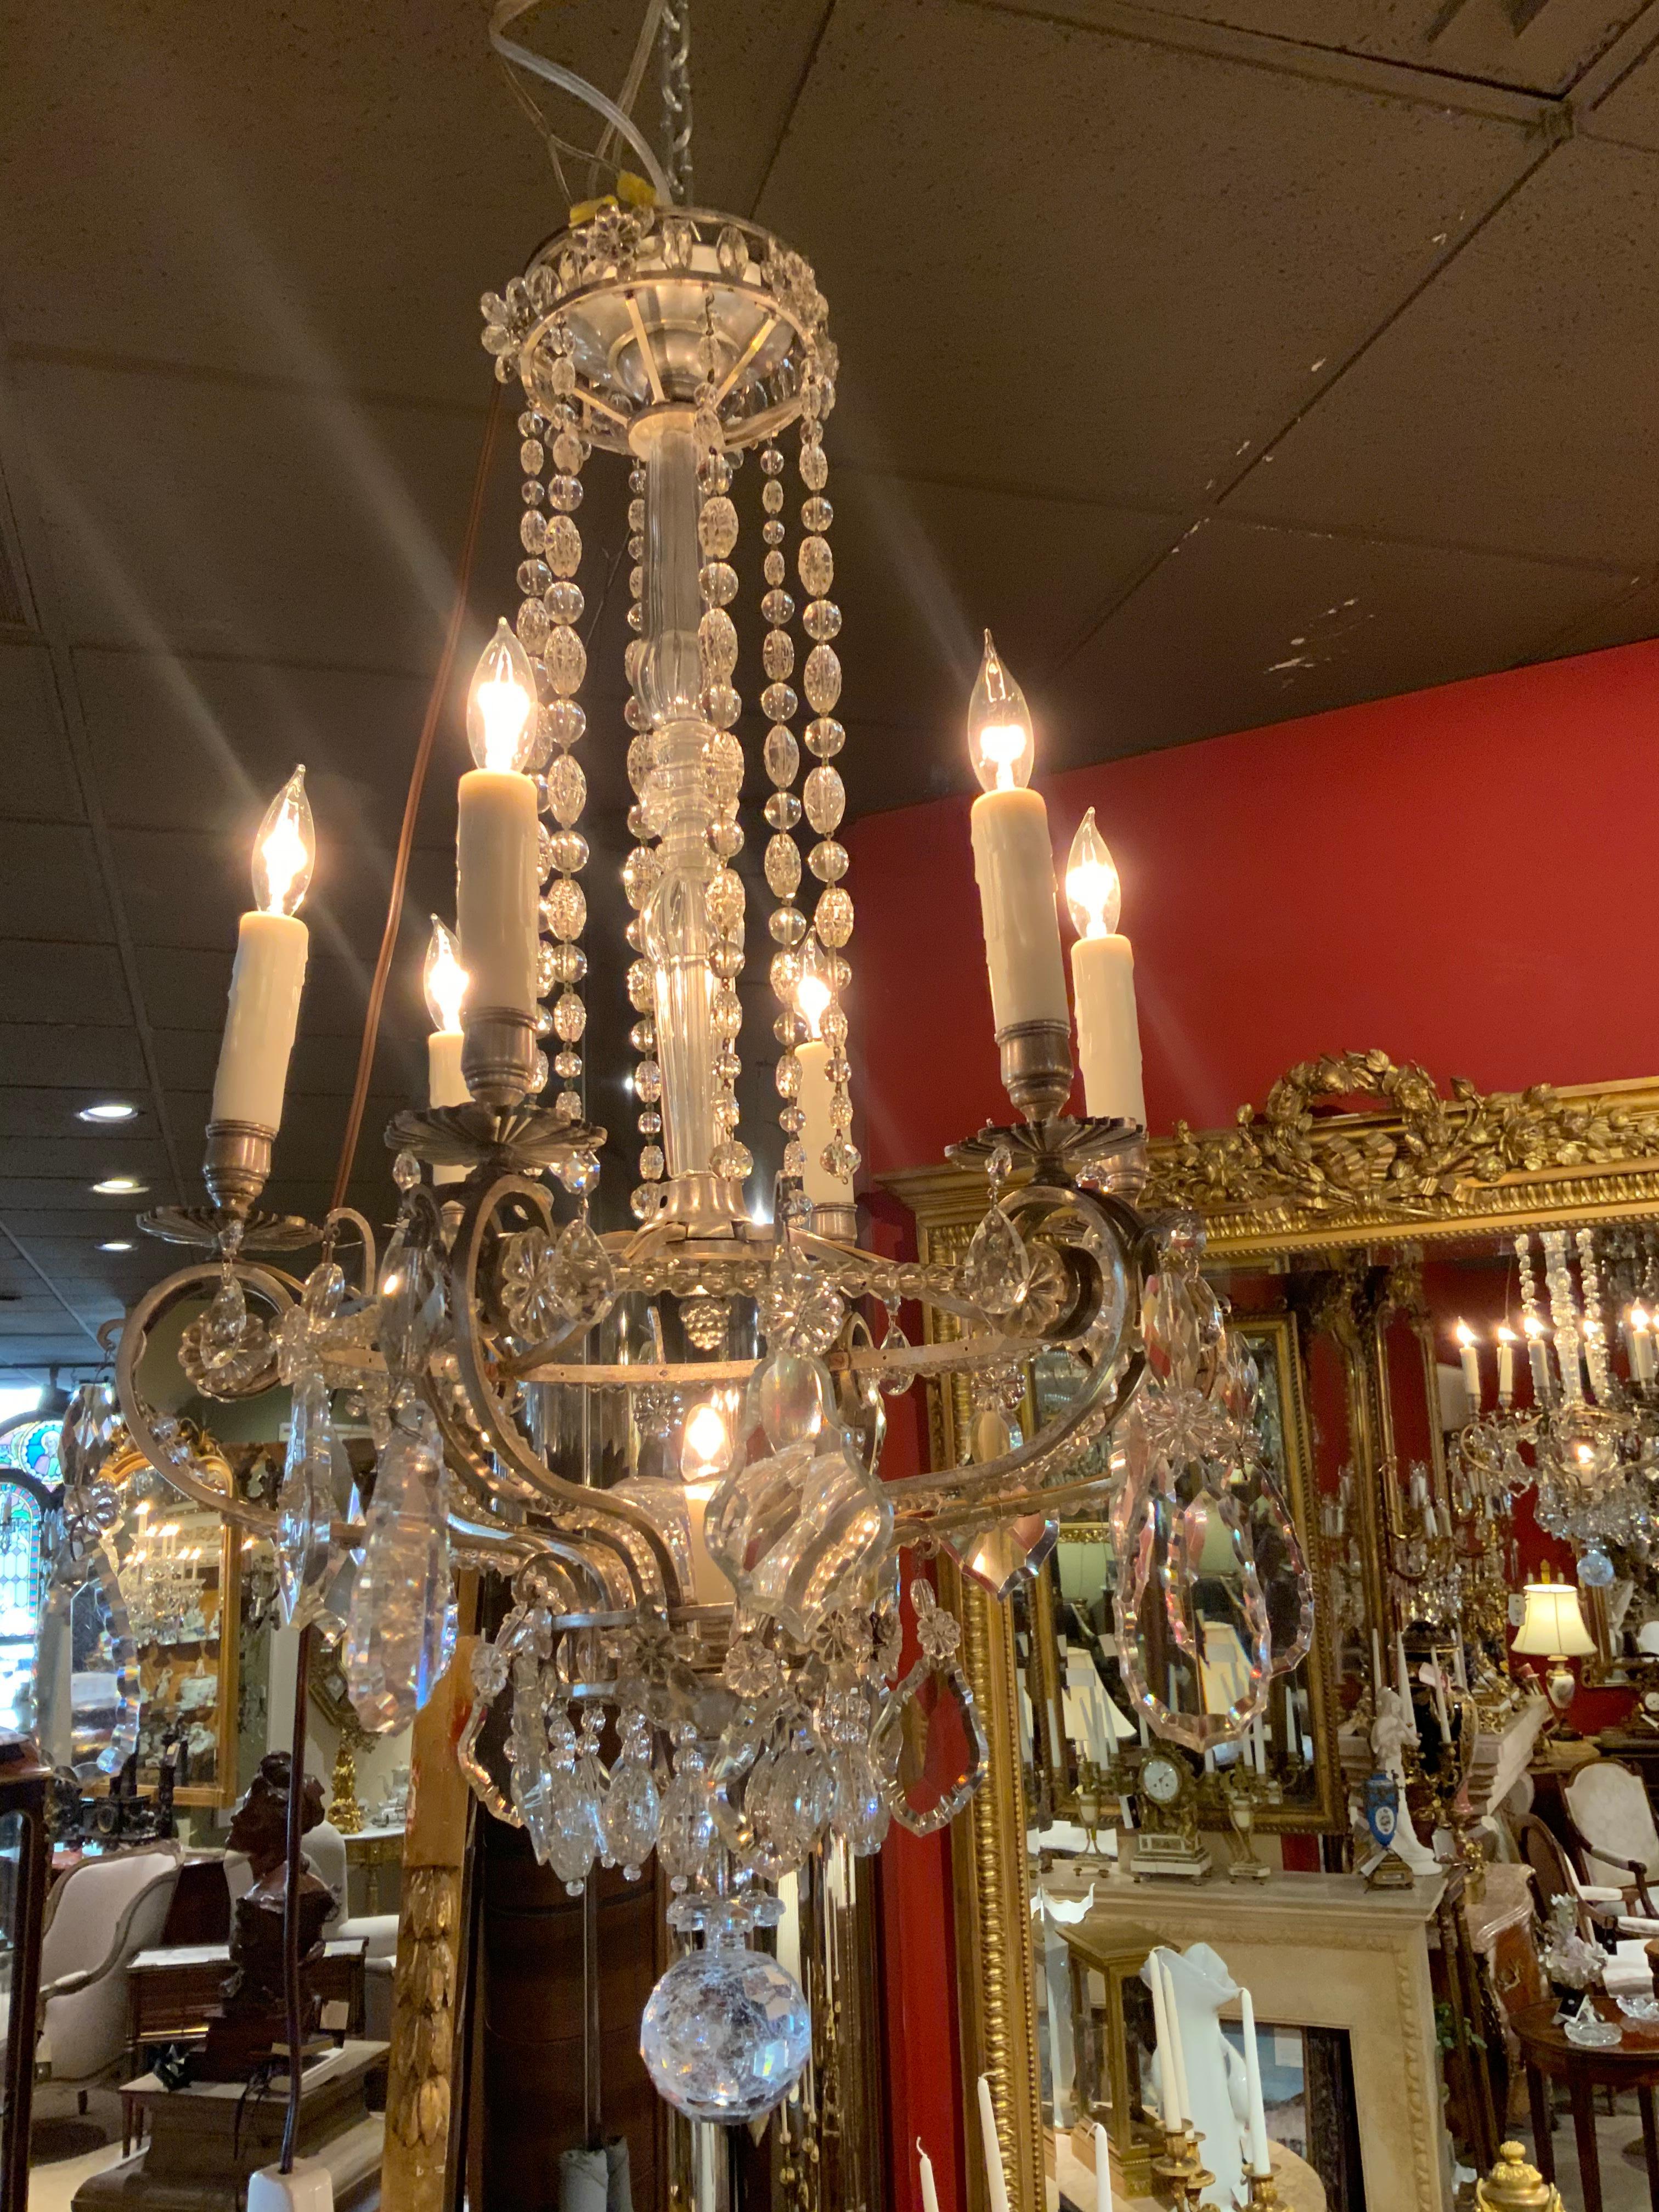 French silver and crystal chandelier with six lights on a beaded ring at the perimeter and one central light
That is  surrounded by a crystal bobéches. Crystal drops in a
Horizontal line Extend from the upper canopy.